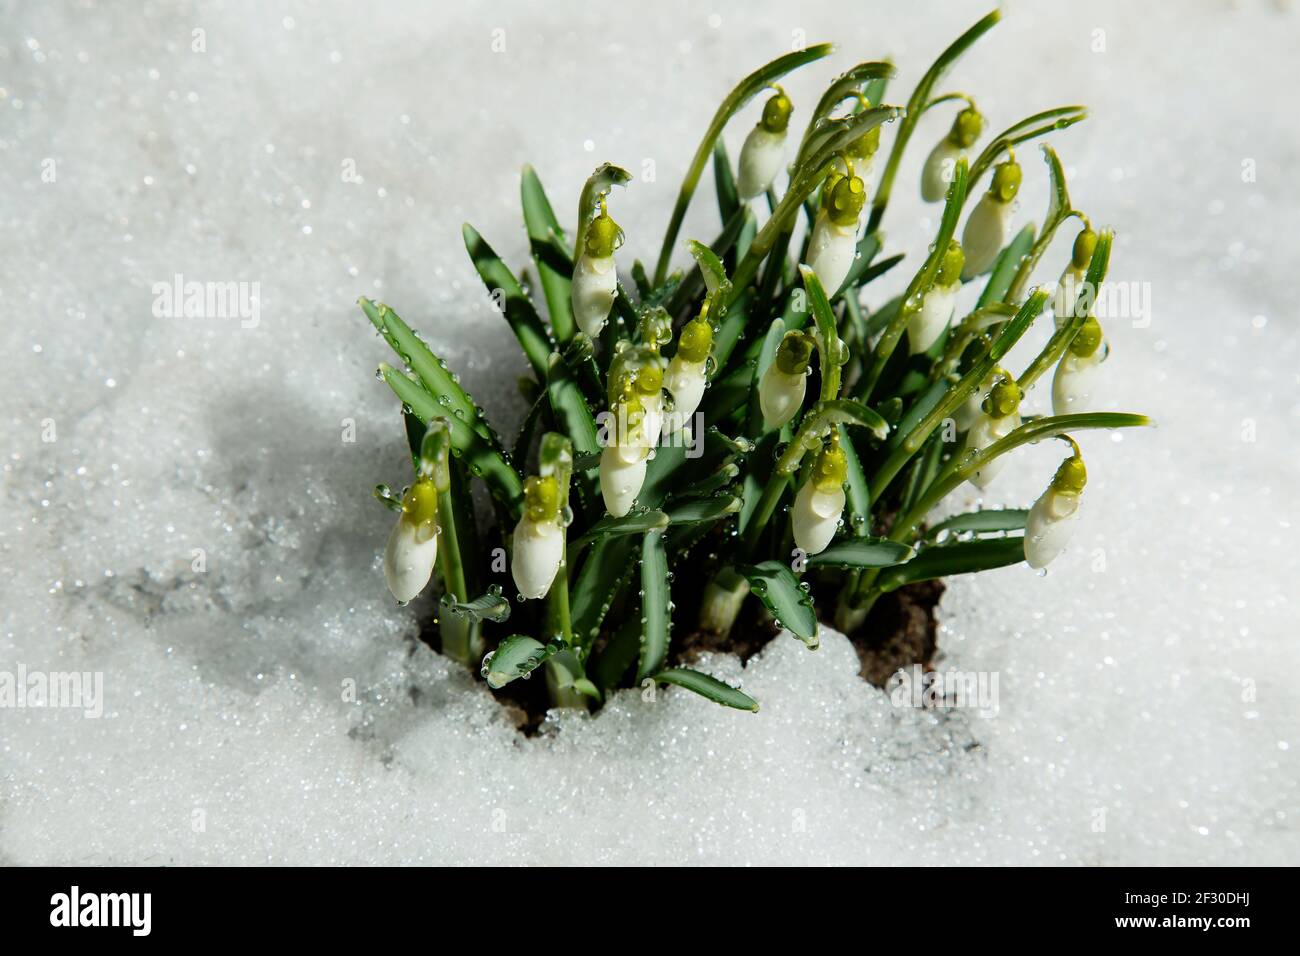 Snowdrops on the snow. Wild flowers in drops of water. Stock Photo